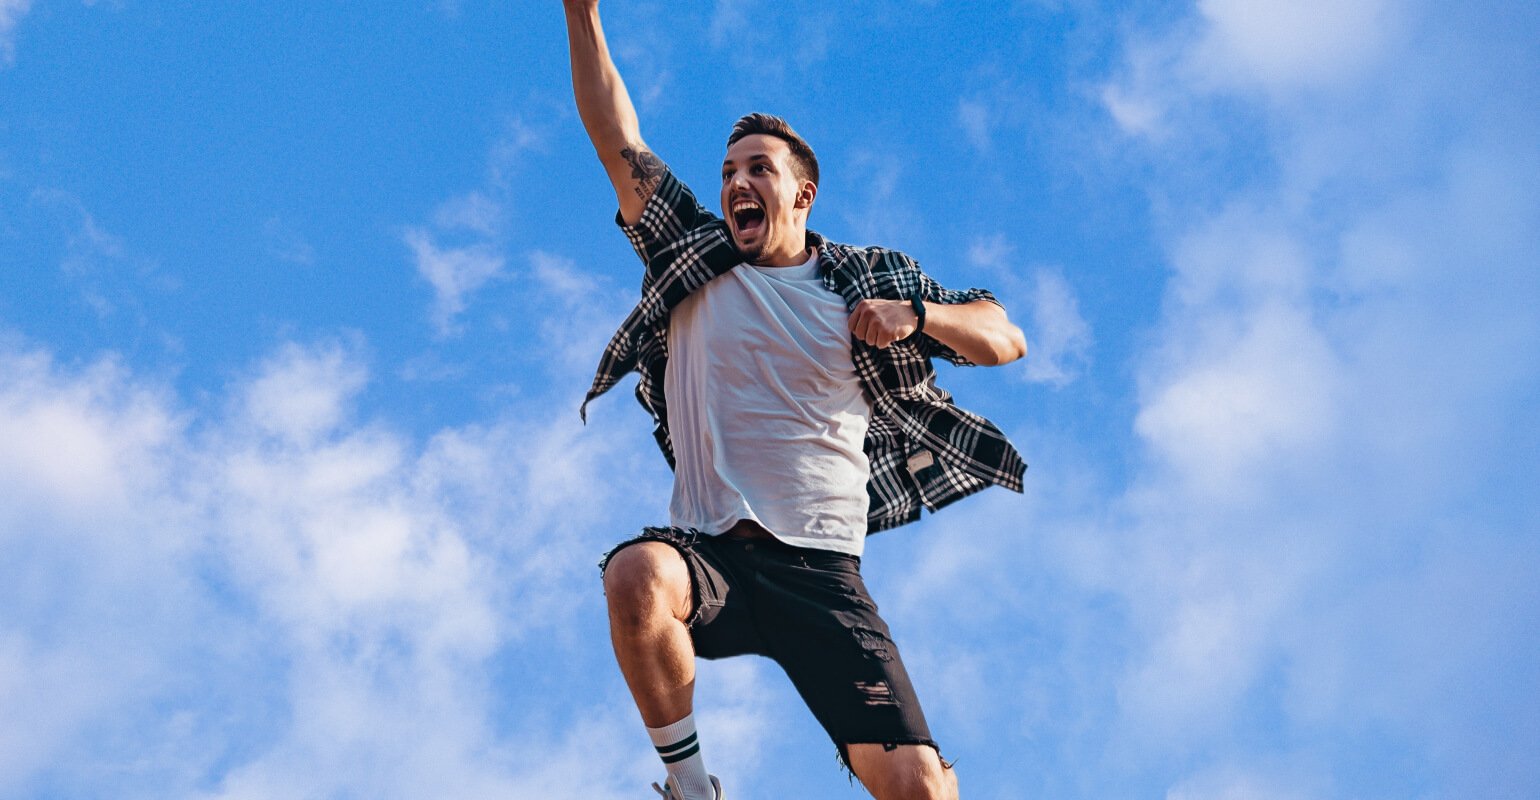 Jumping man image with blue sky background